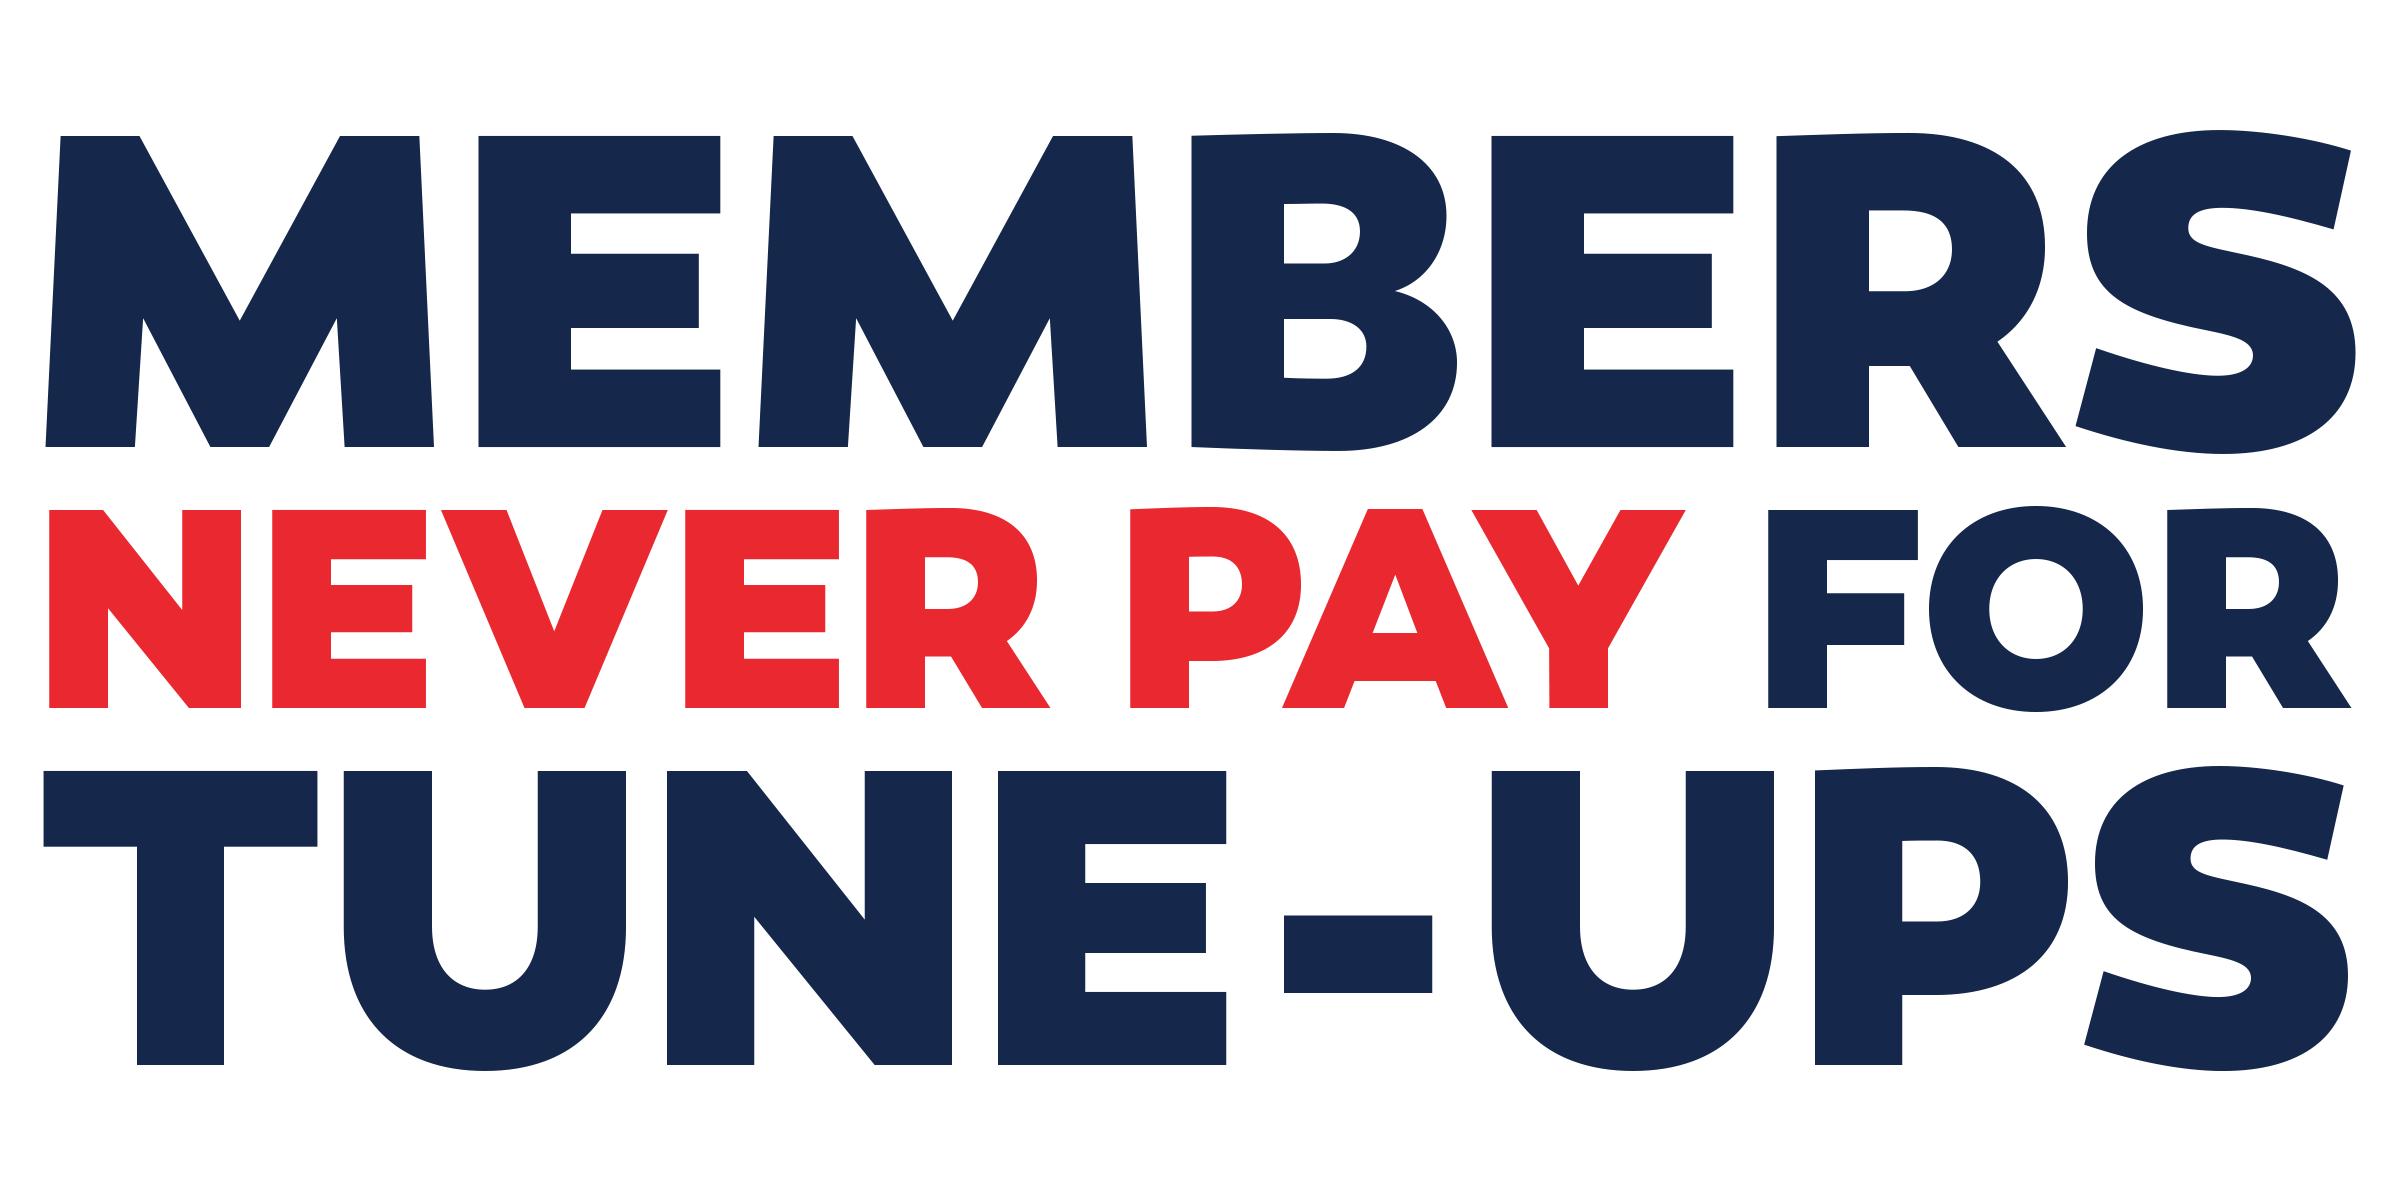 never pay